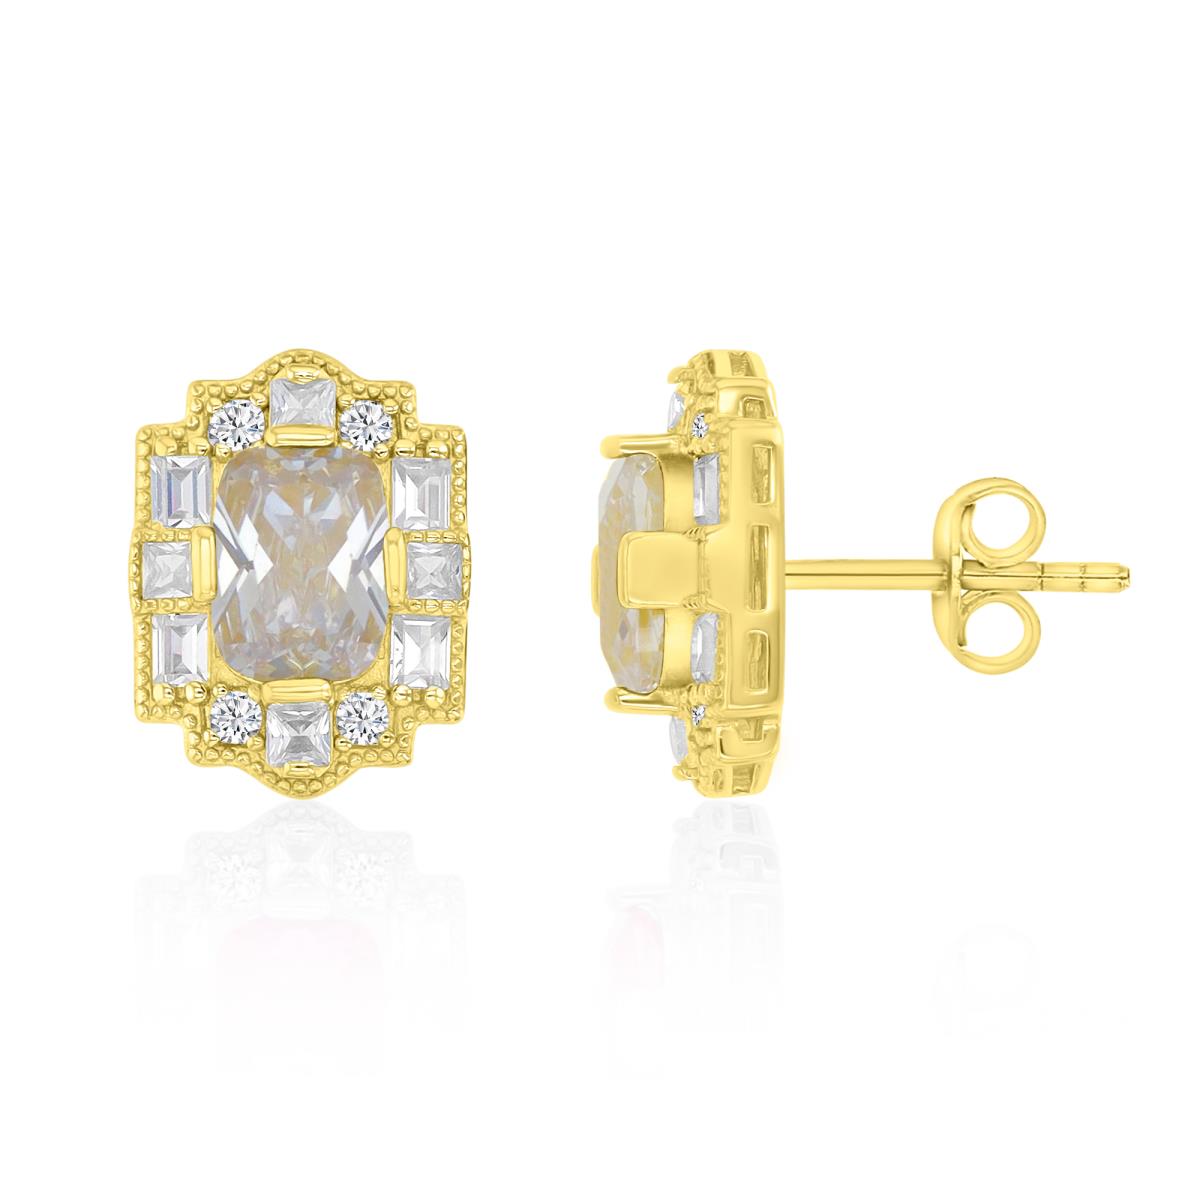 Sterling Silver Yellow 1M 15X11MM Polished White CZ Vintage Cushion Cut Stud Earrings